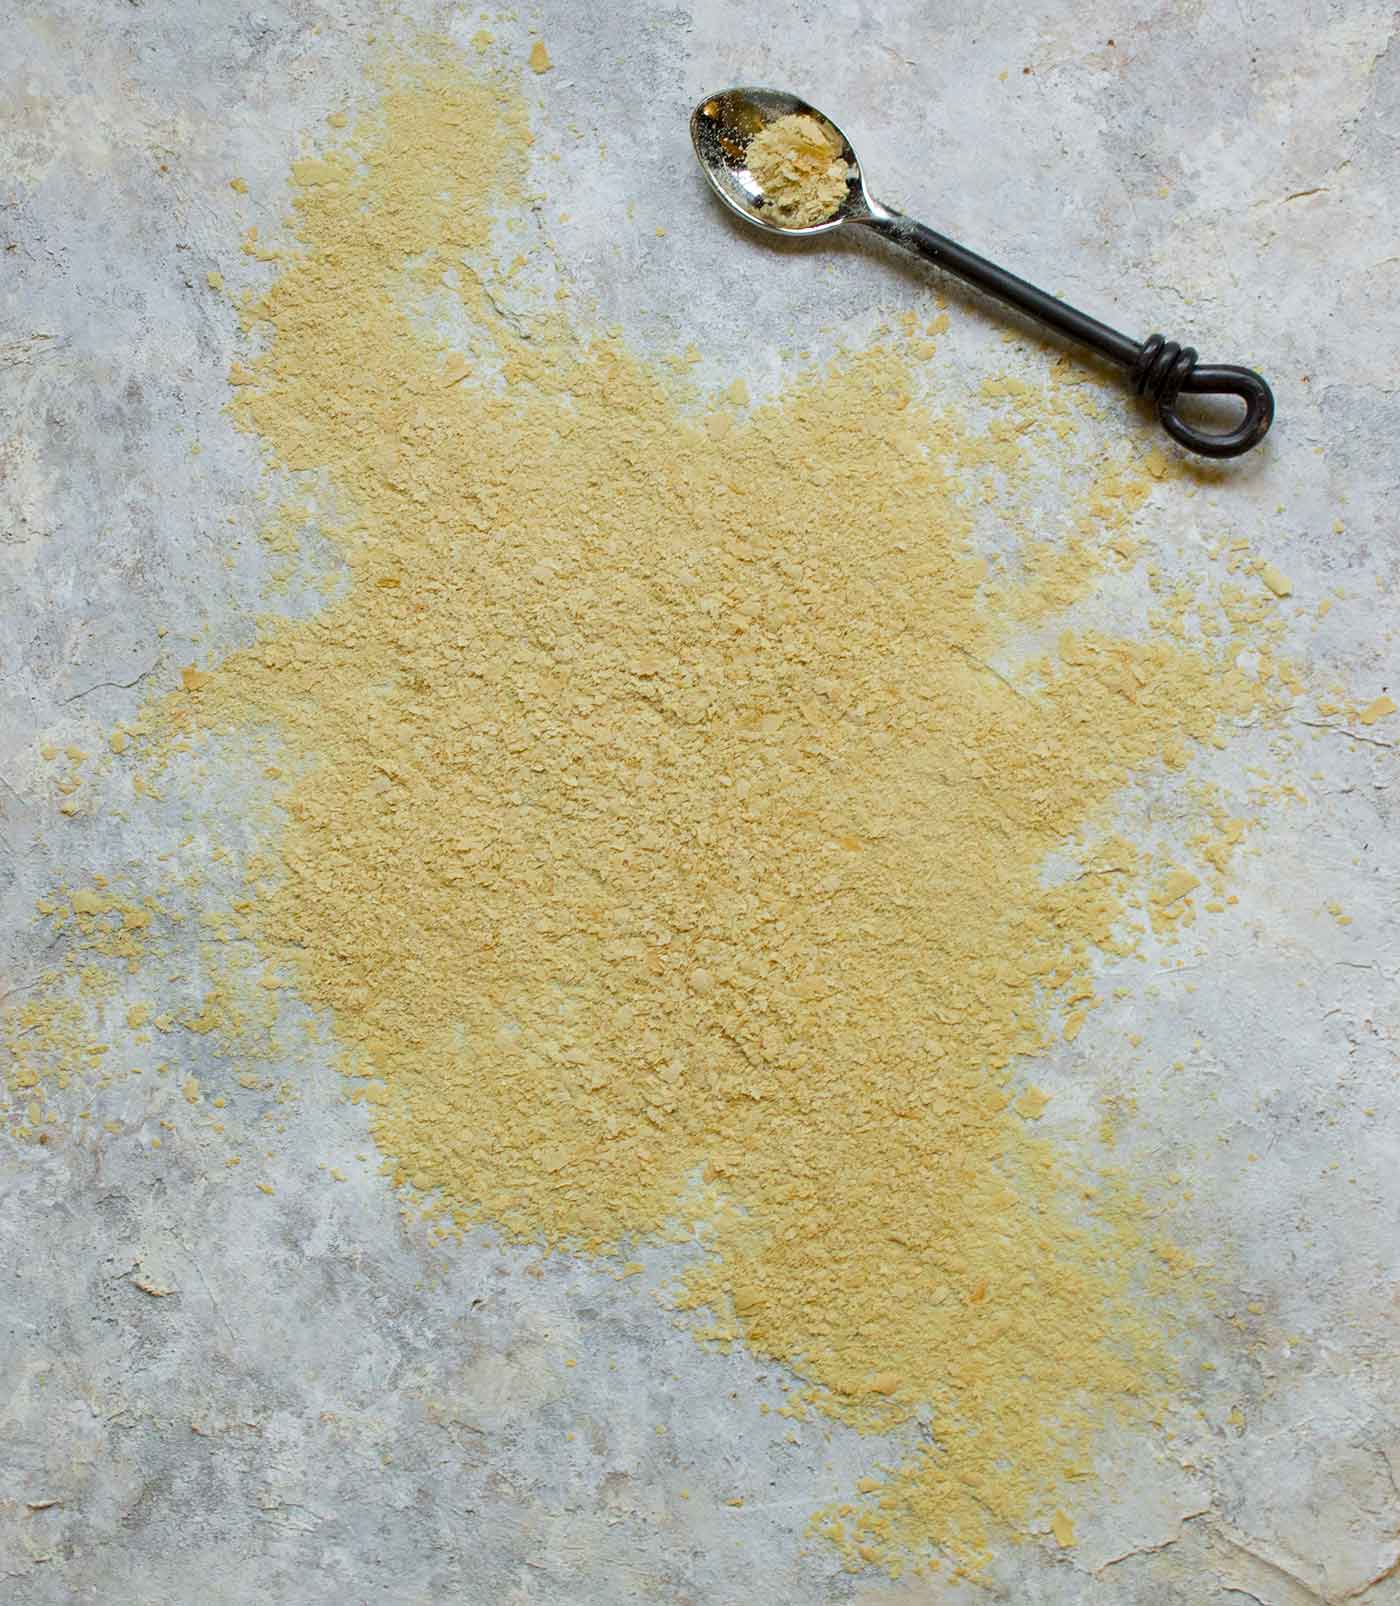 Nutritional yeast flakes scattered on the counter